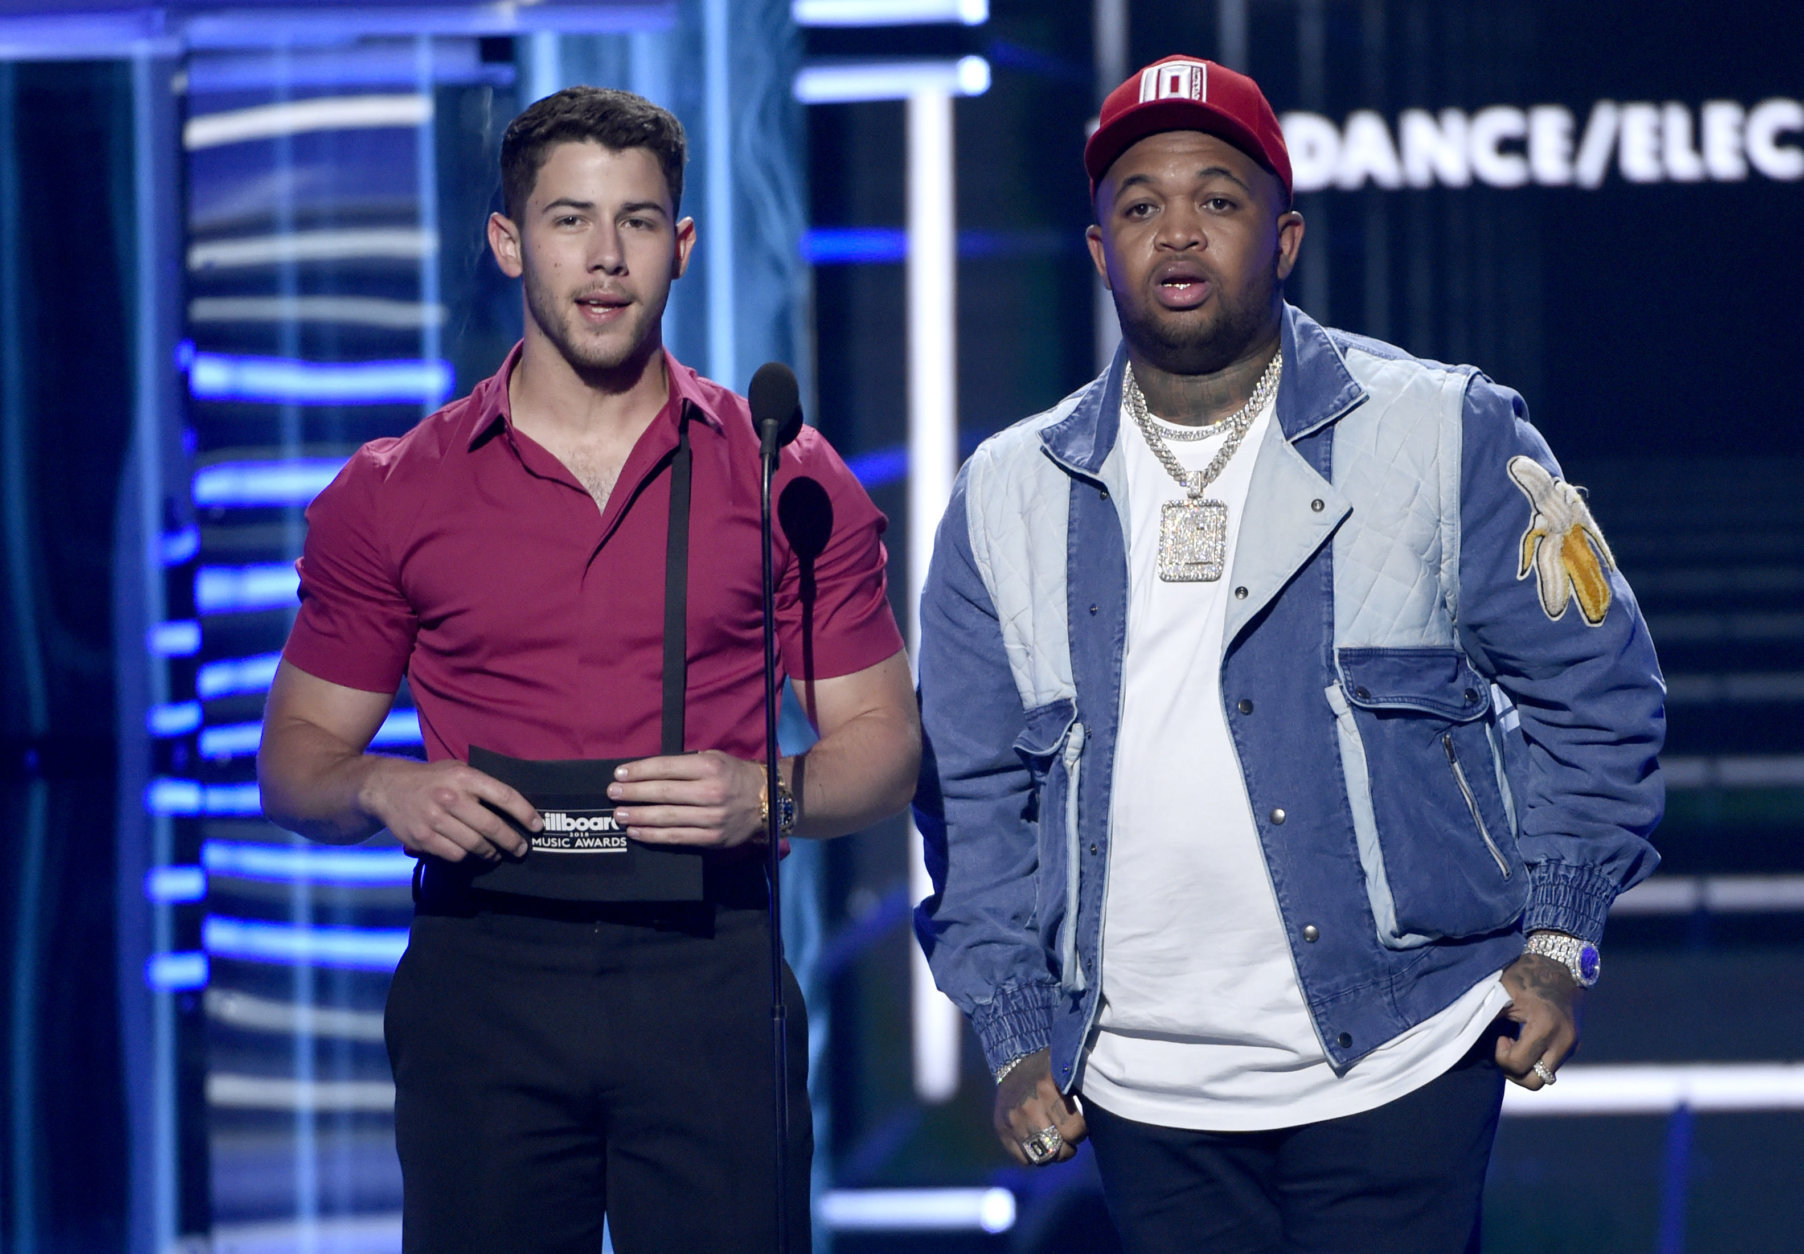 Nick Jonas, left, and Mustard present the award for top dance/electronica artist at the Billboard Music Awards at the MGM Grand Garden Arena on Sunday, May 20, 2018, in Las Vegas. (Photo by Chris Pizzello/Invision/AP)